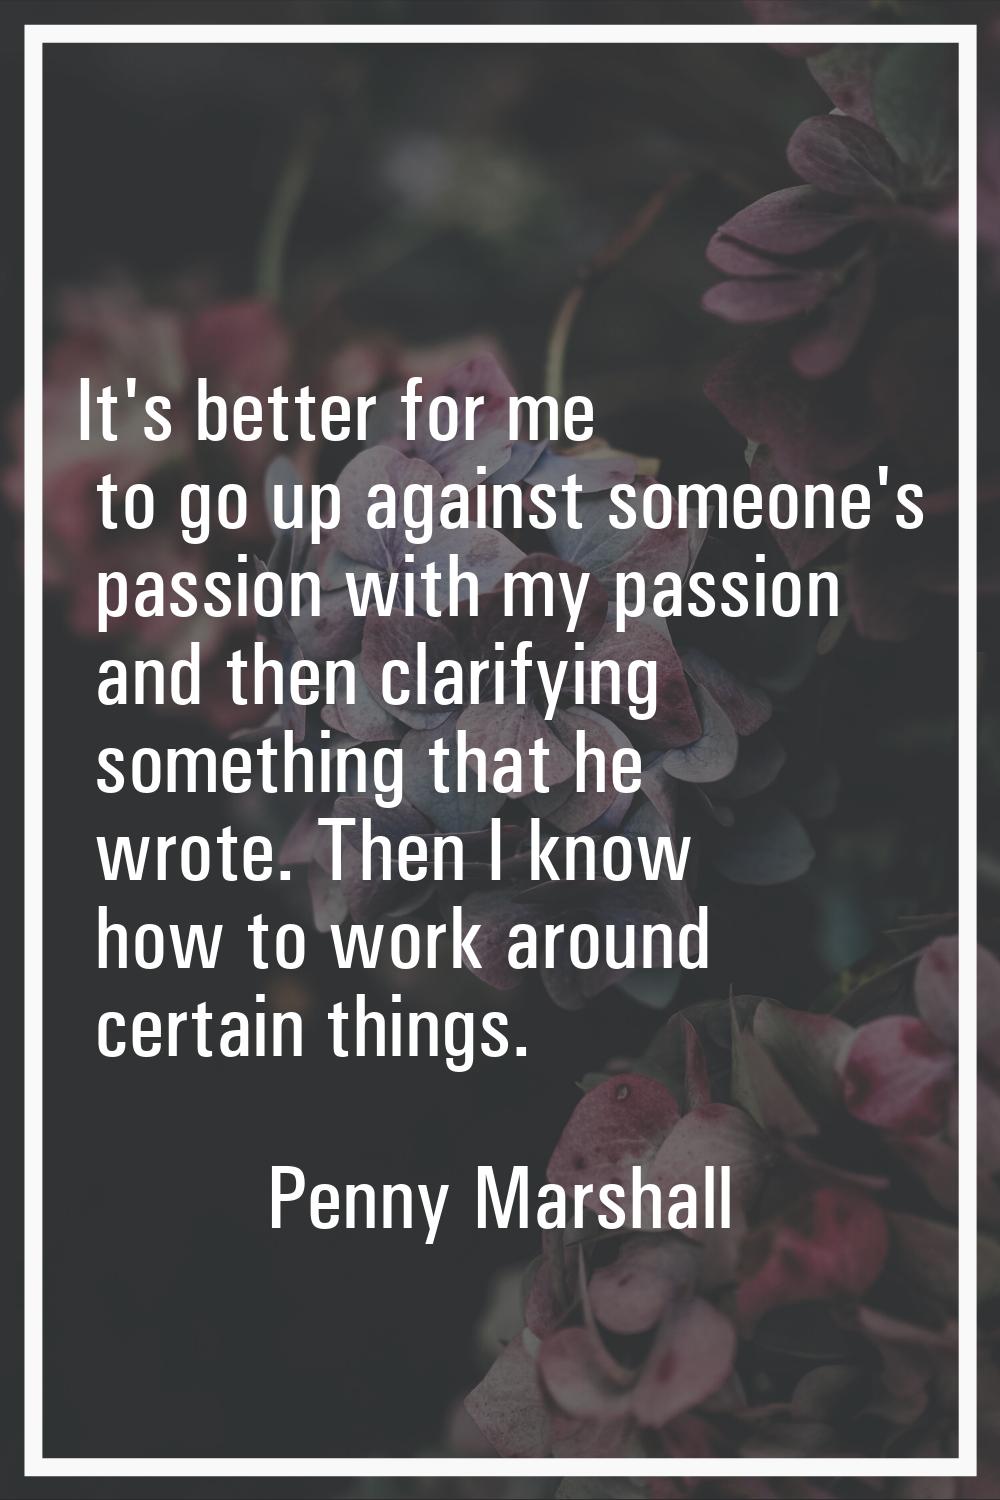 It's better for me to go up against someone's passion with my passion and then clarifying something